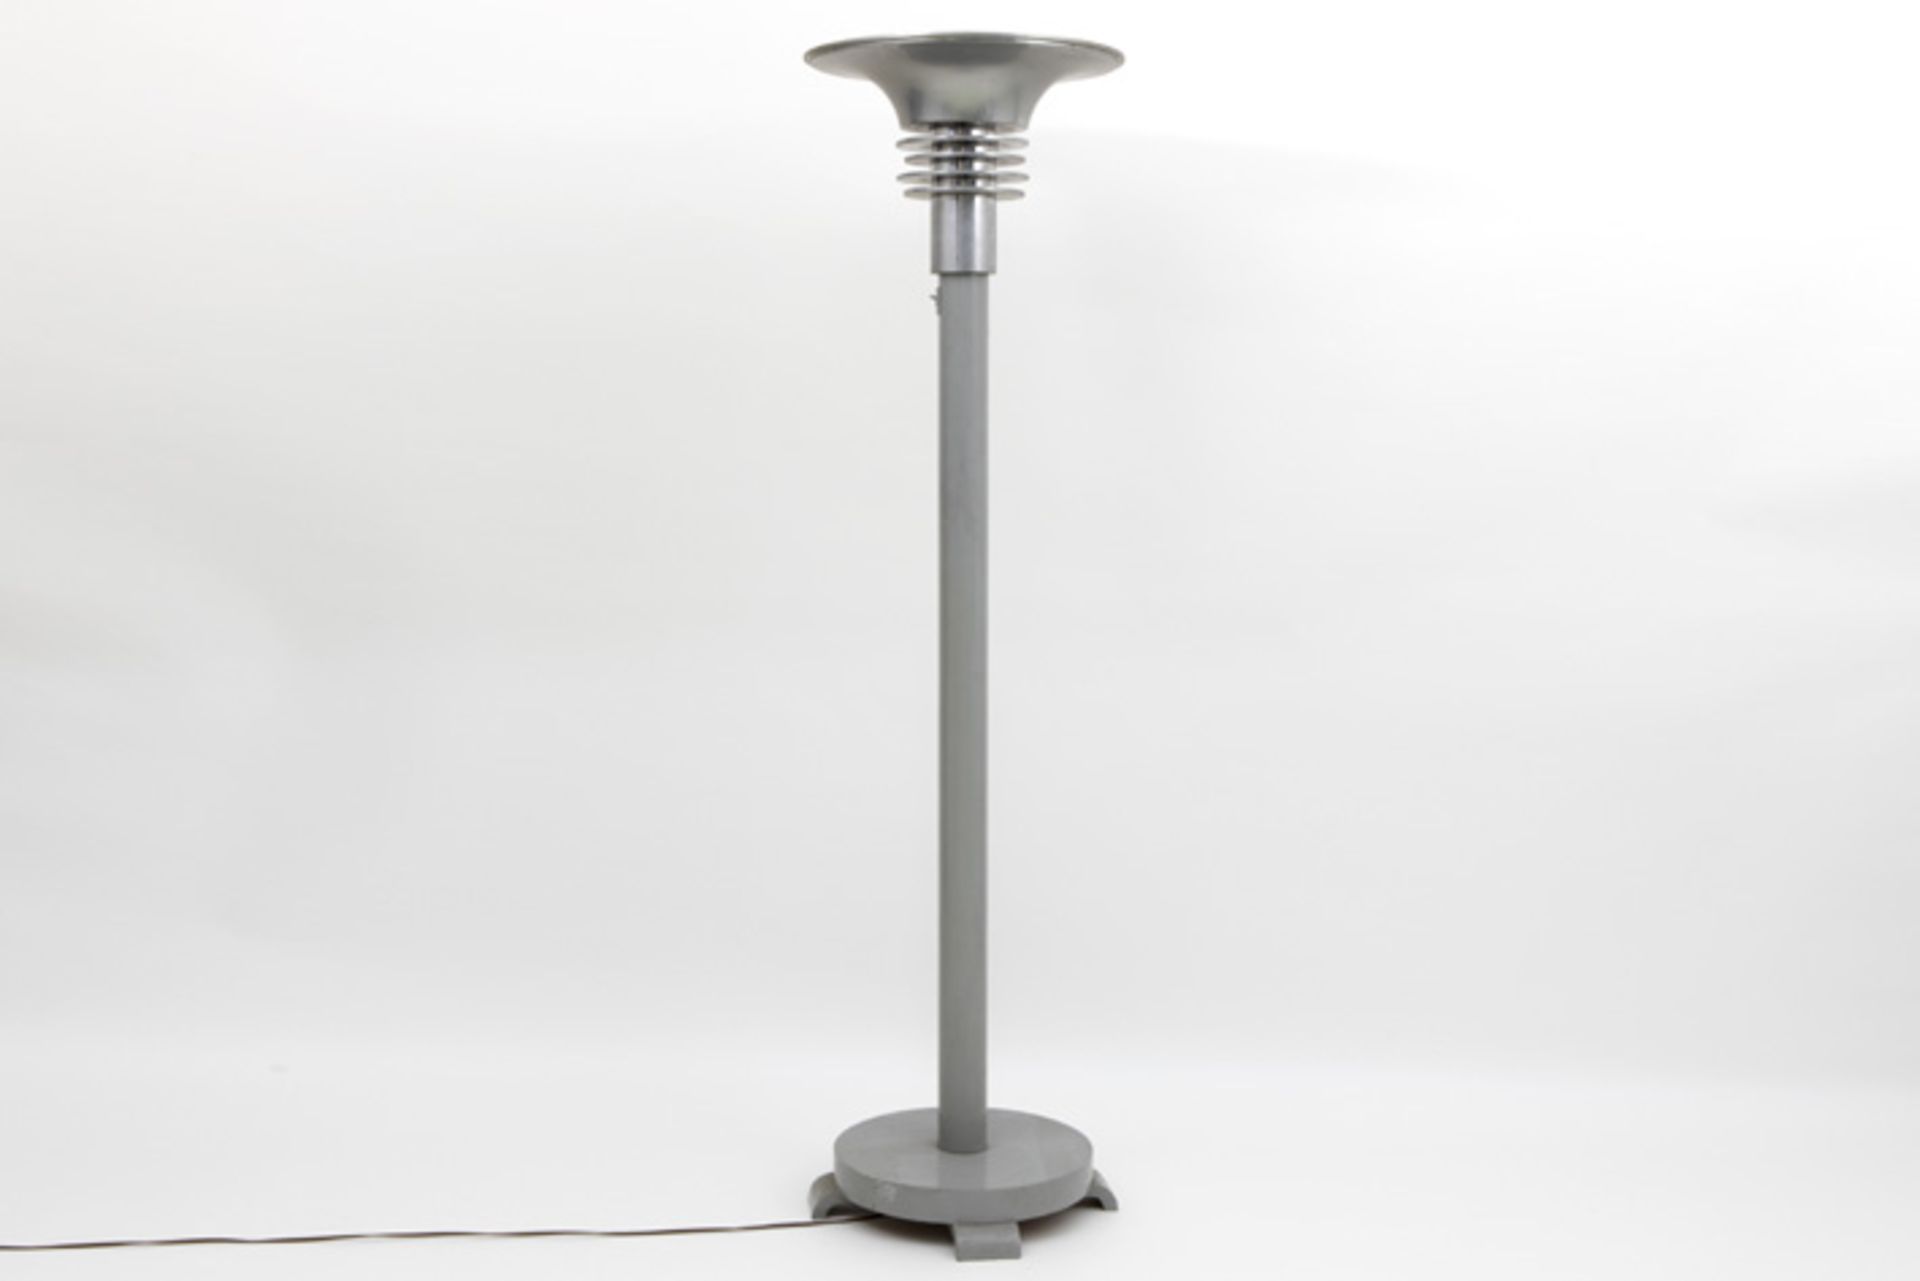 Art Deco lamp in partially painted partially chromed stand || Mooie staande Art Deco-lamp met